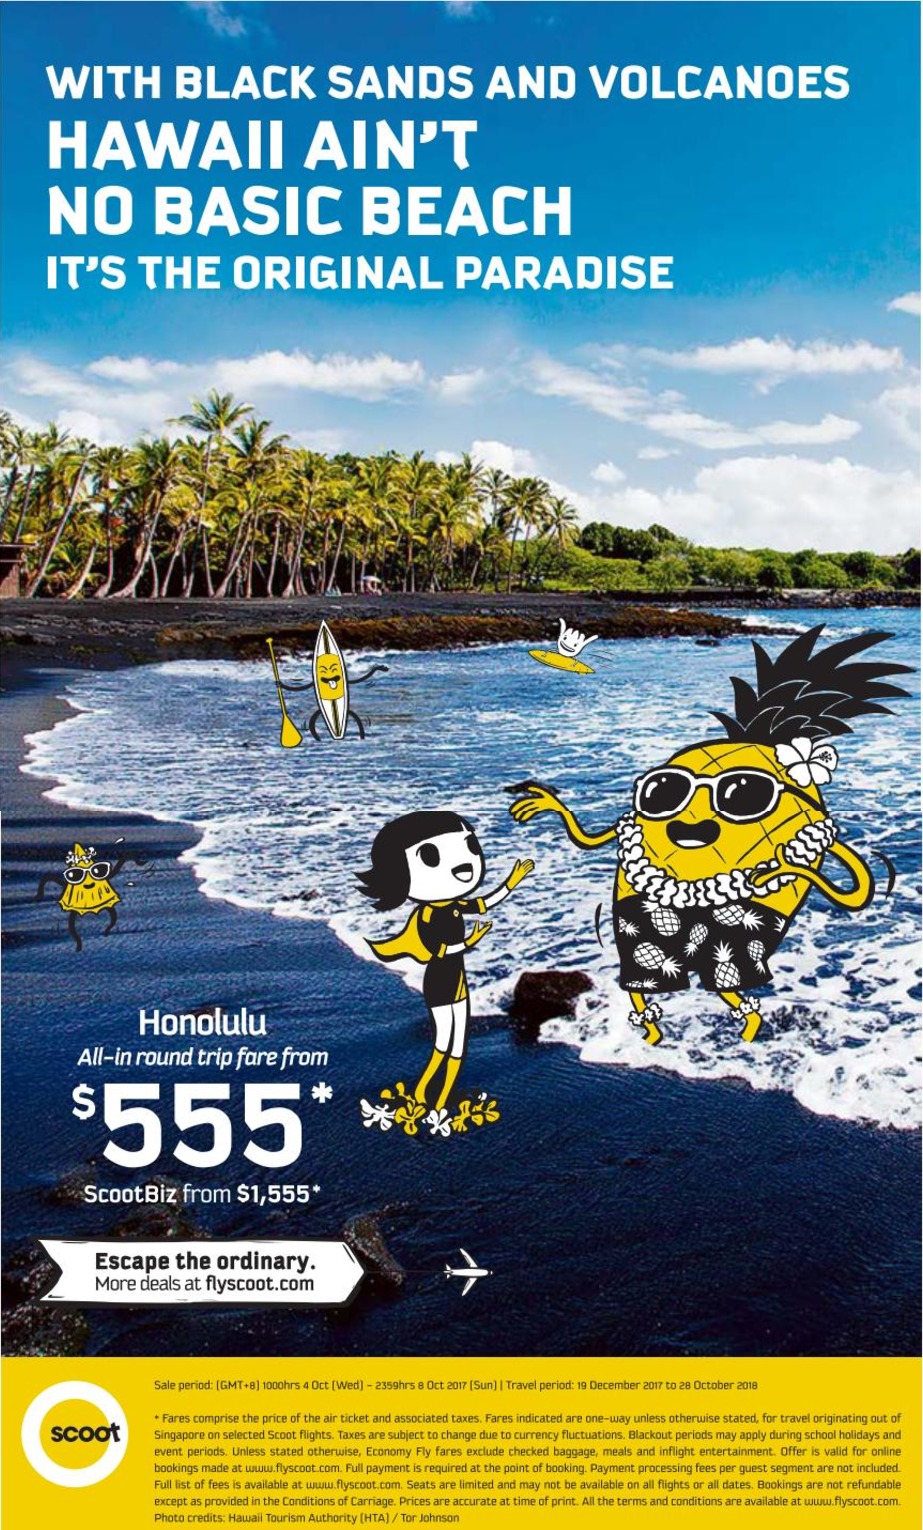 Scoot launches flight sale to Honolulu, Hawaii from 4 – 8